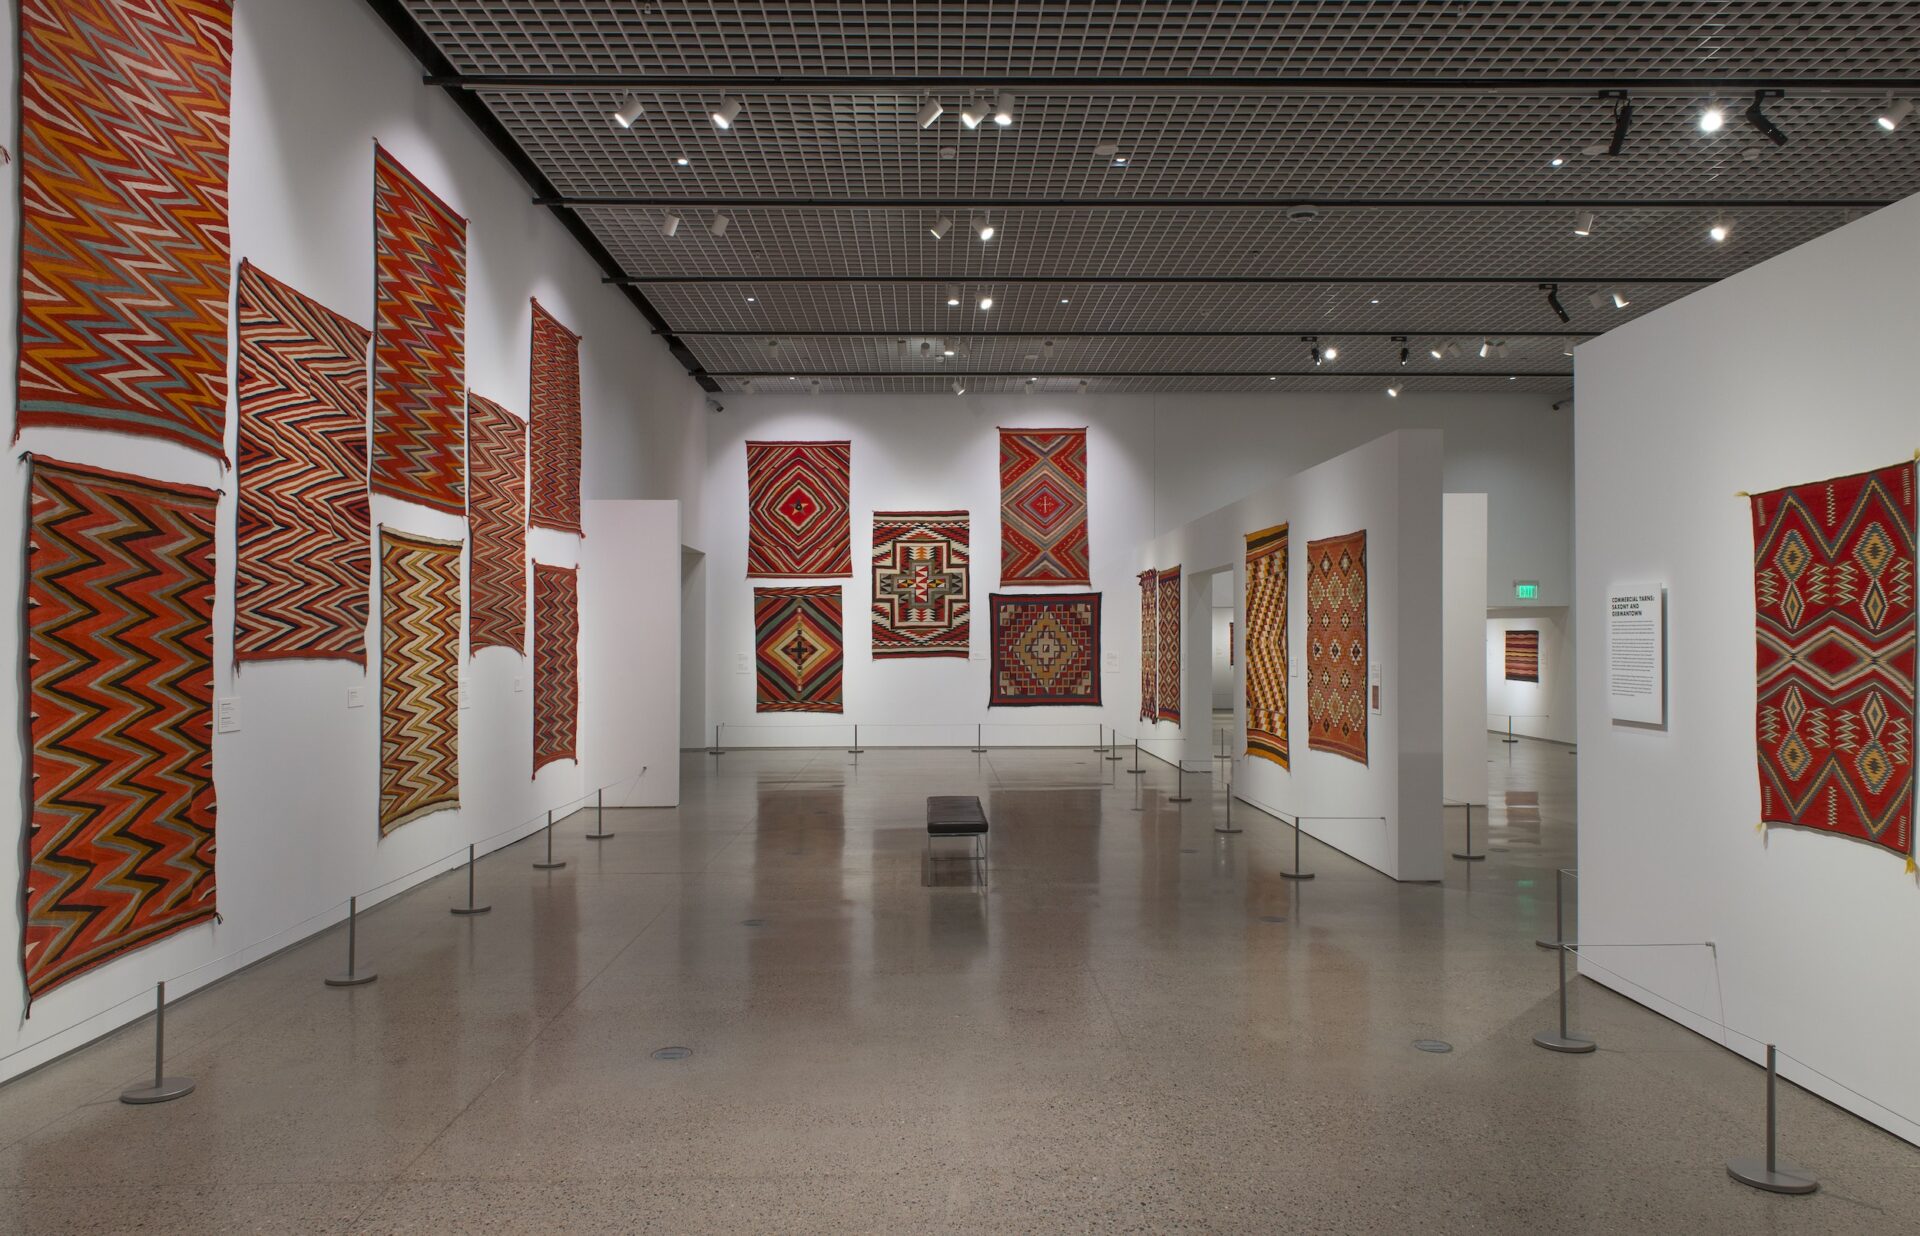 A gallery space with a lot of textiles designed in shades of red on display on the walls.